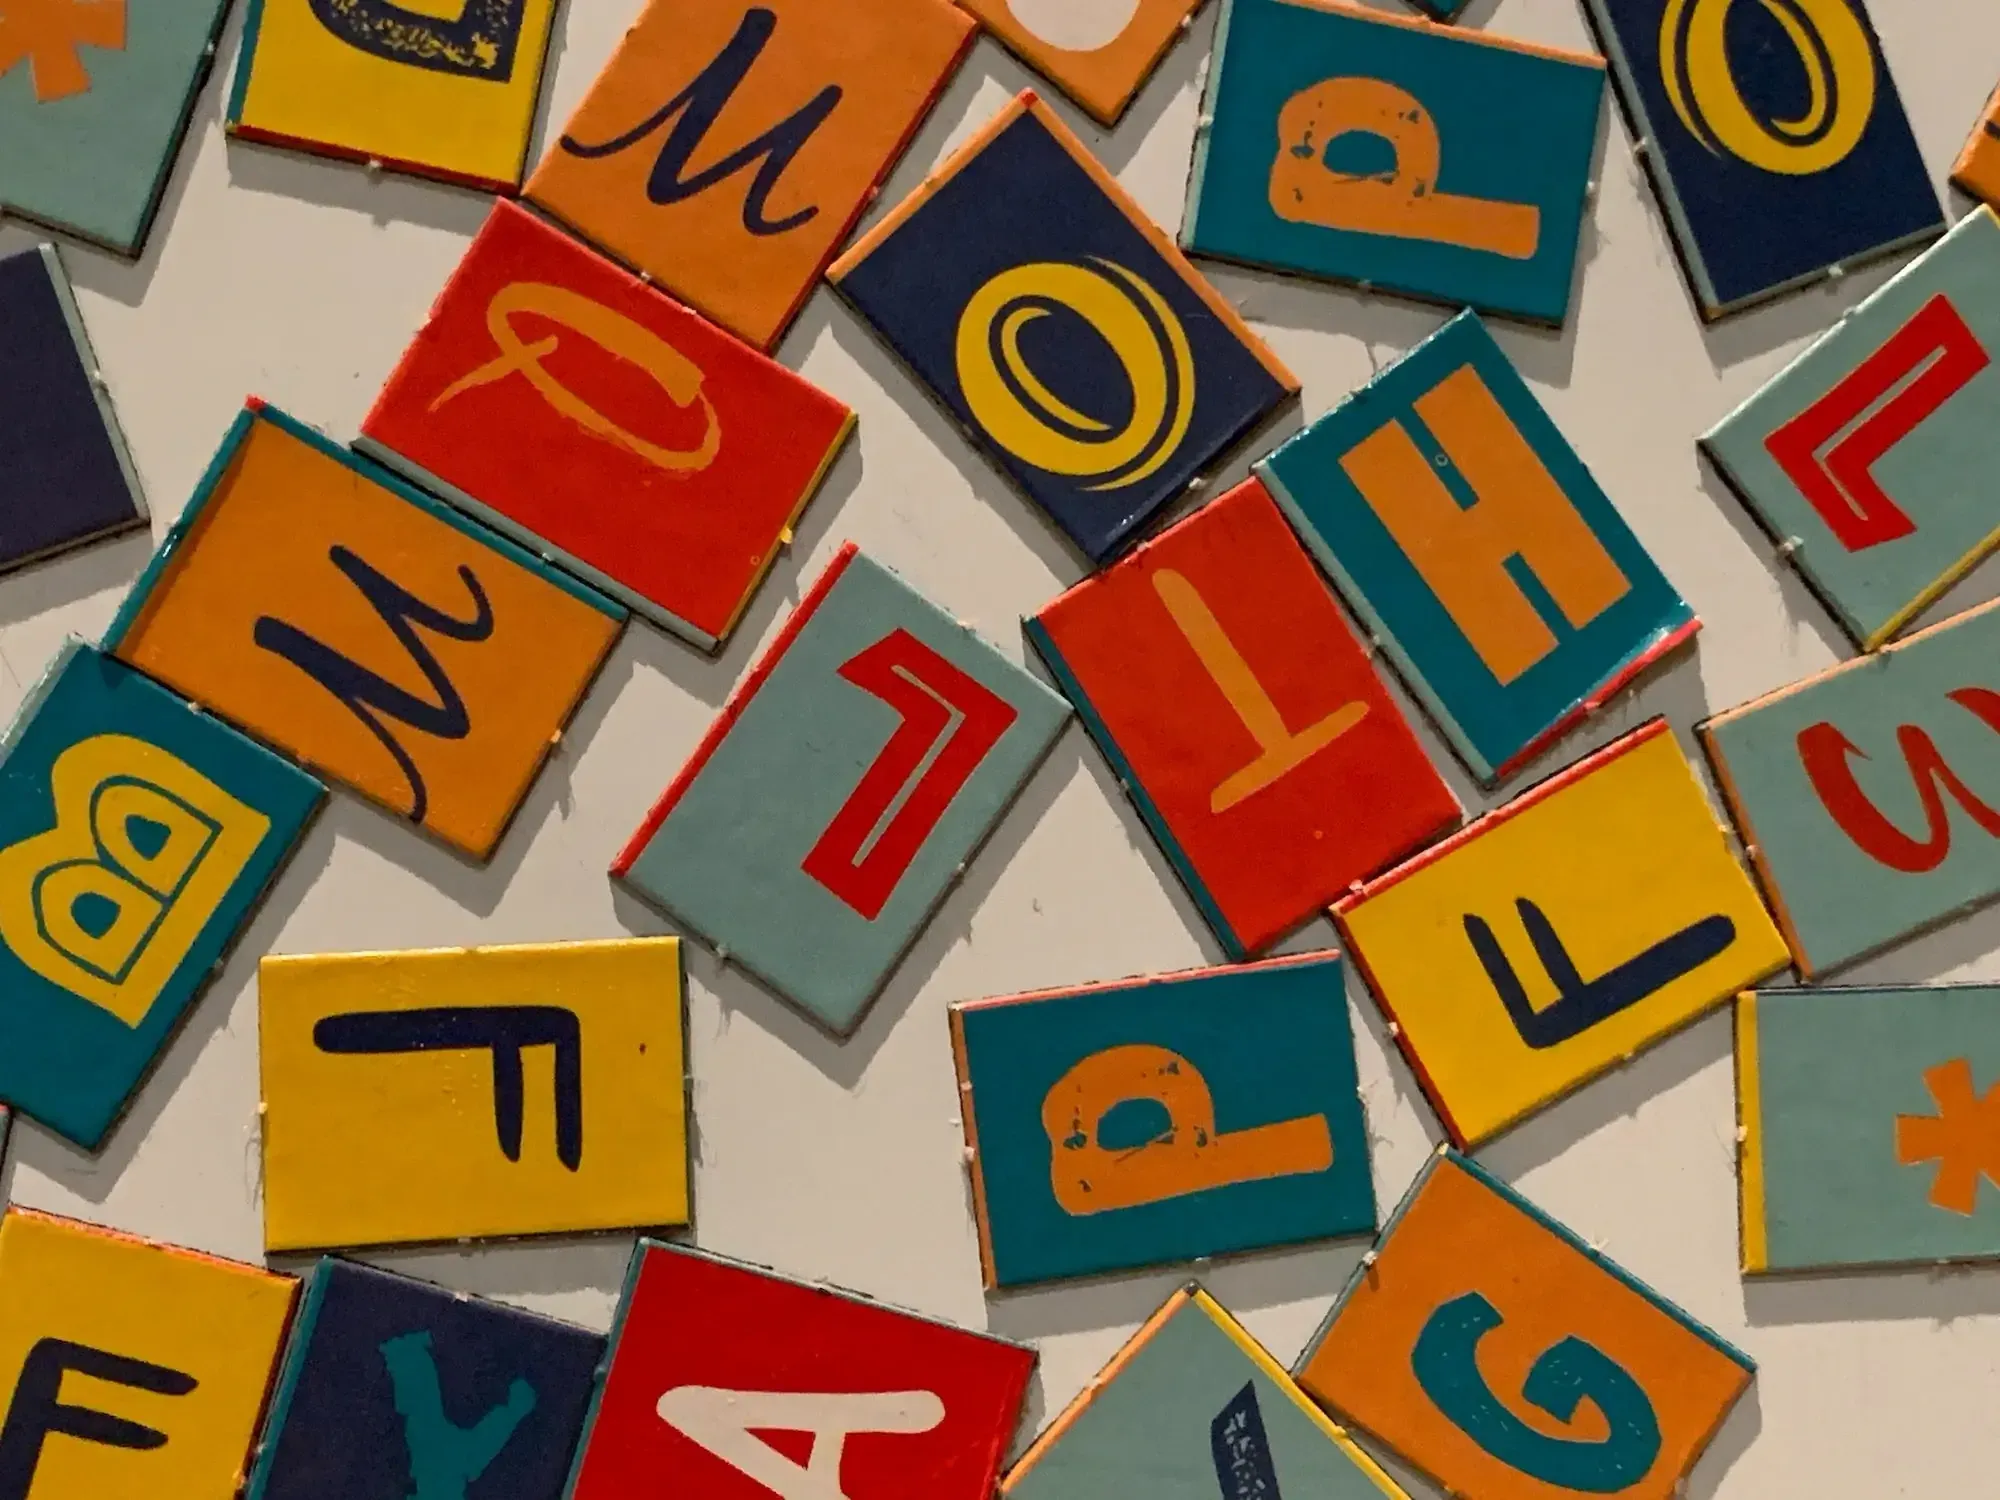 Colorful plates with letters on them laying mixed together.